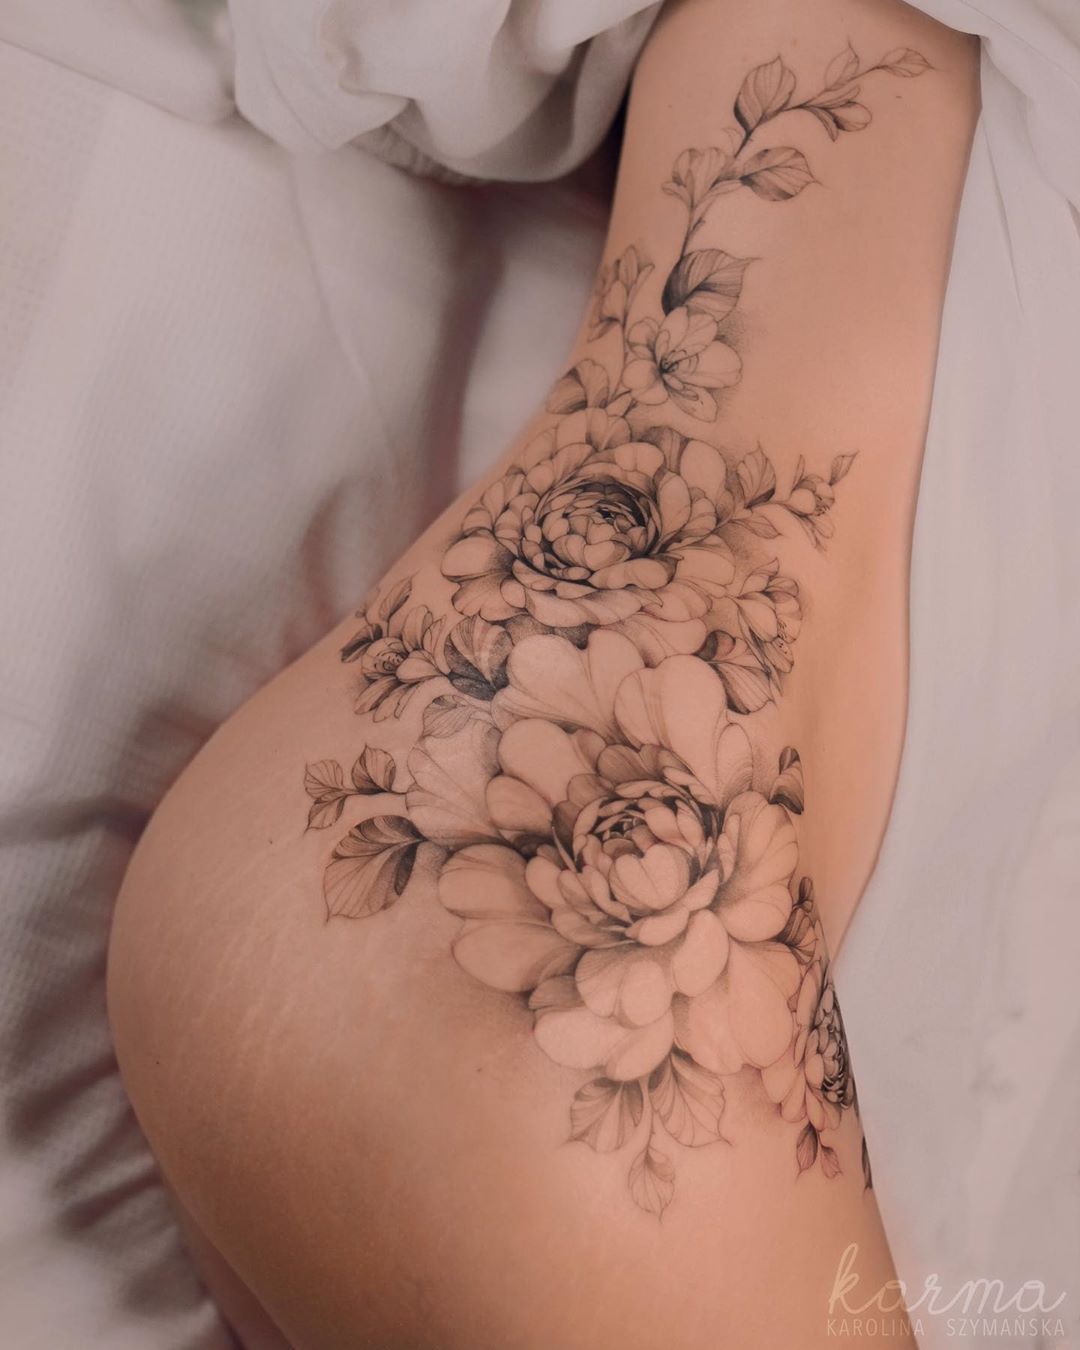 Floral Tattoo Artists Who Capture the Diverse Beauty of Blooms